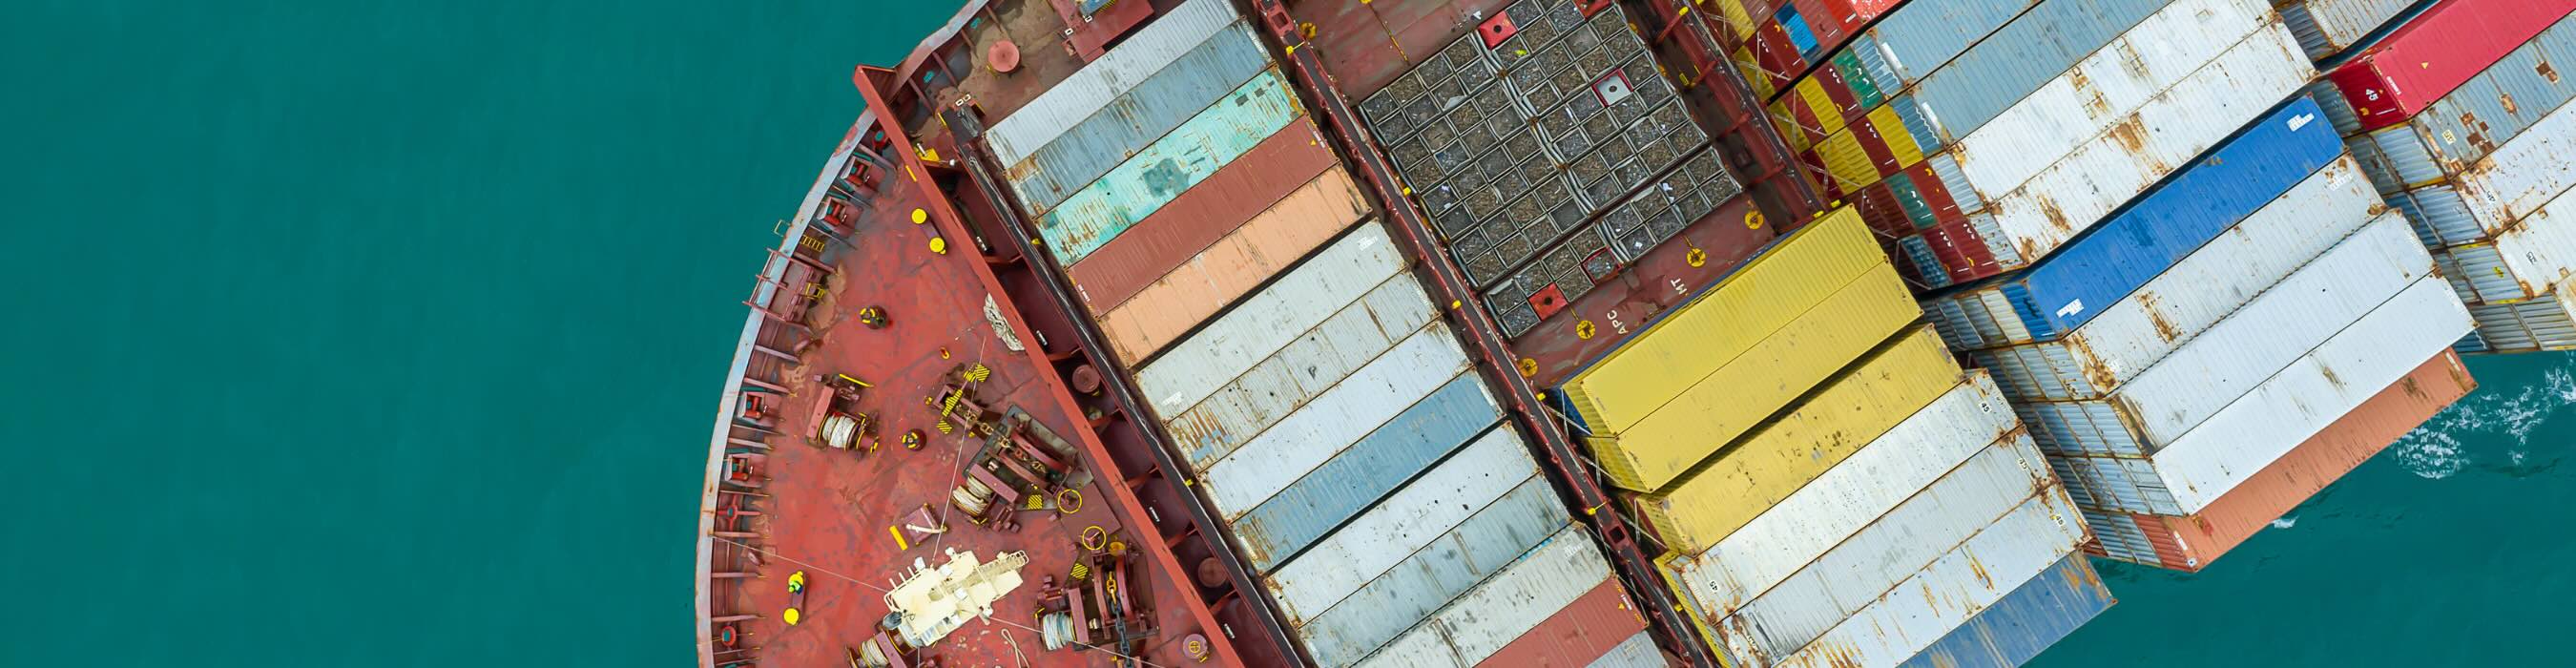 shipping containers on a ship